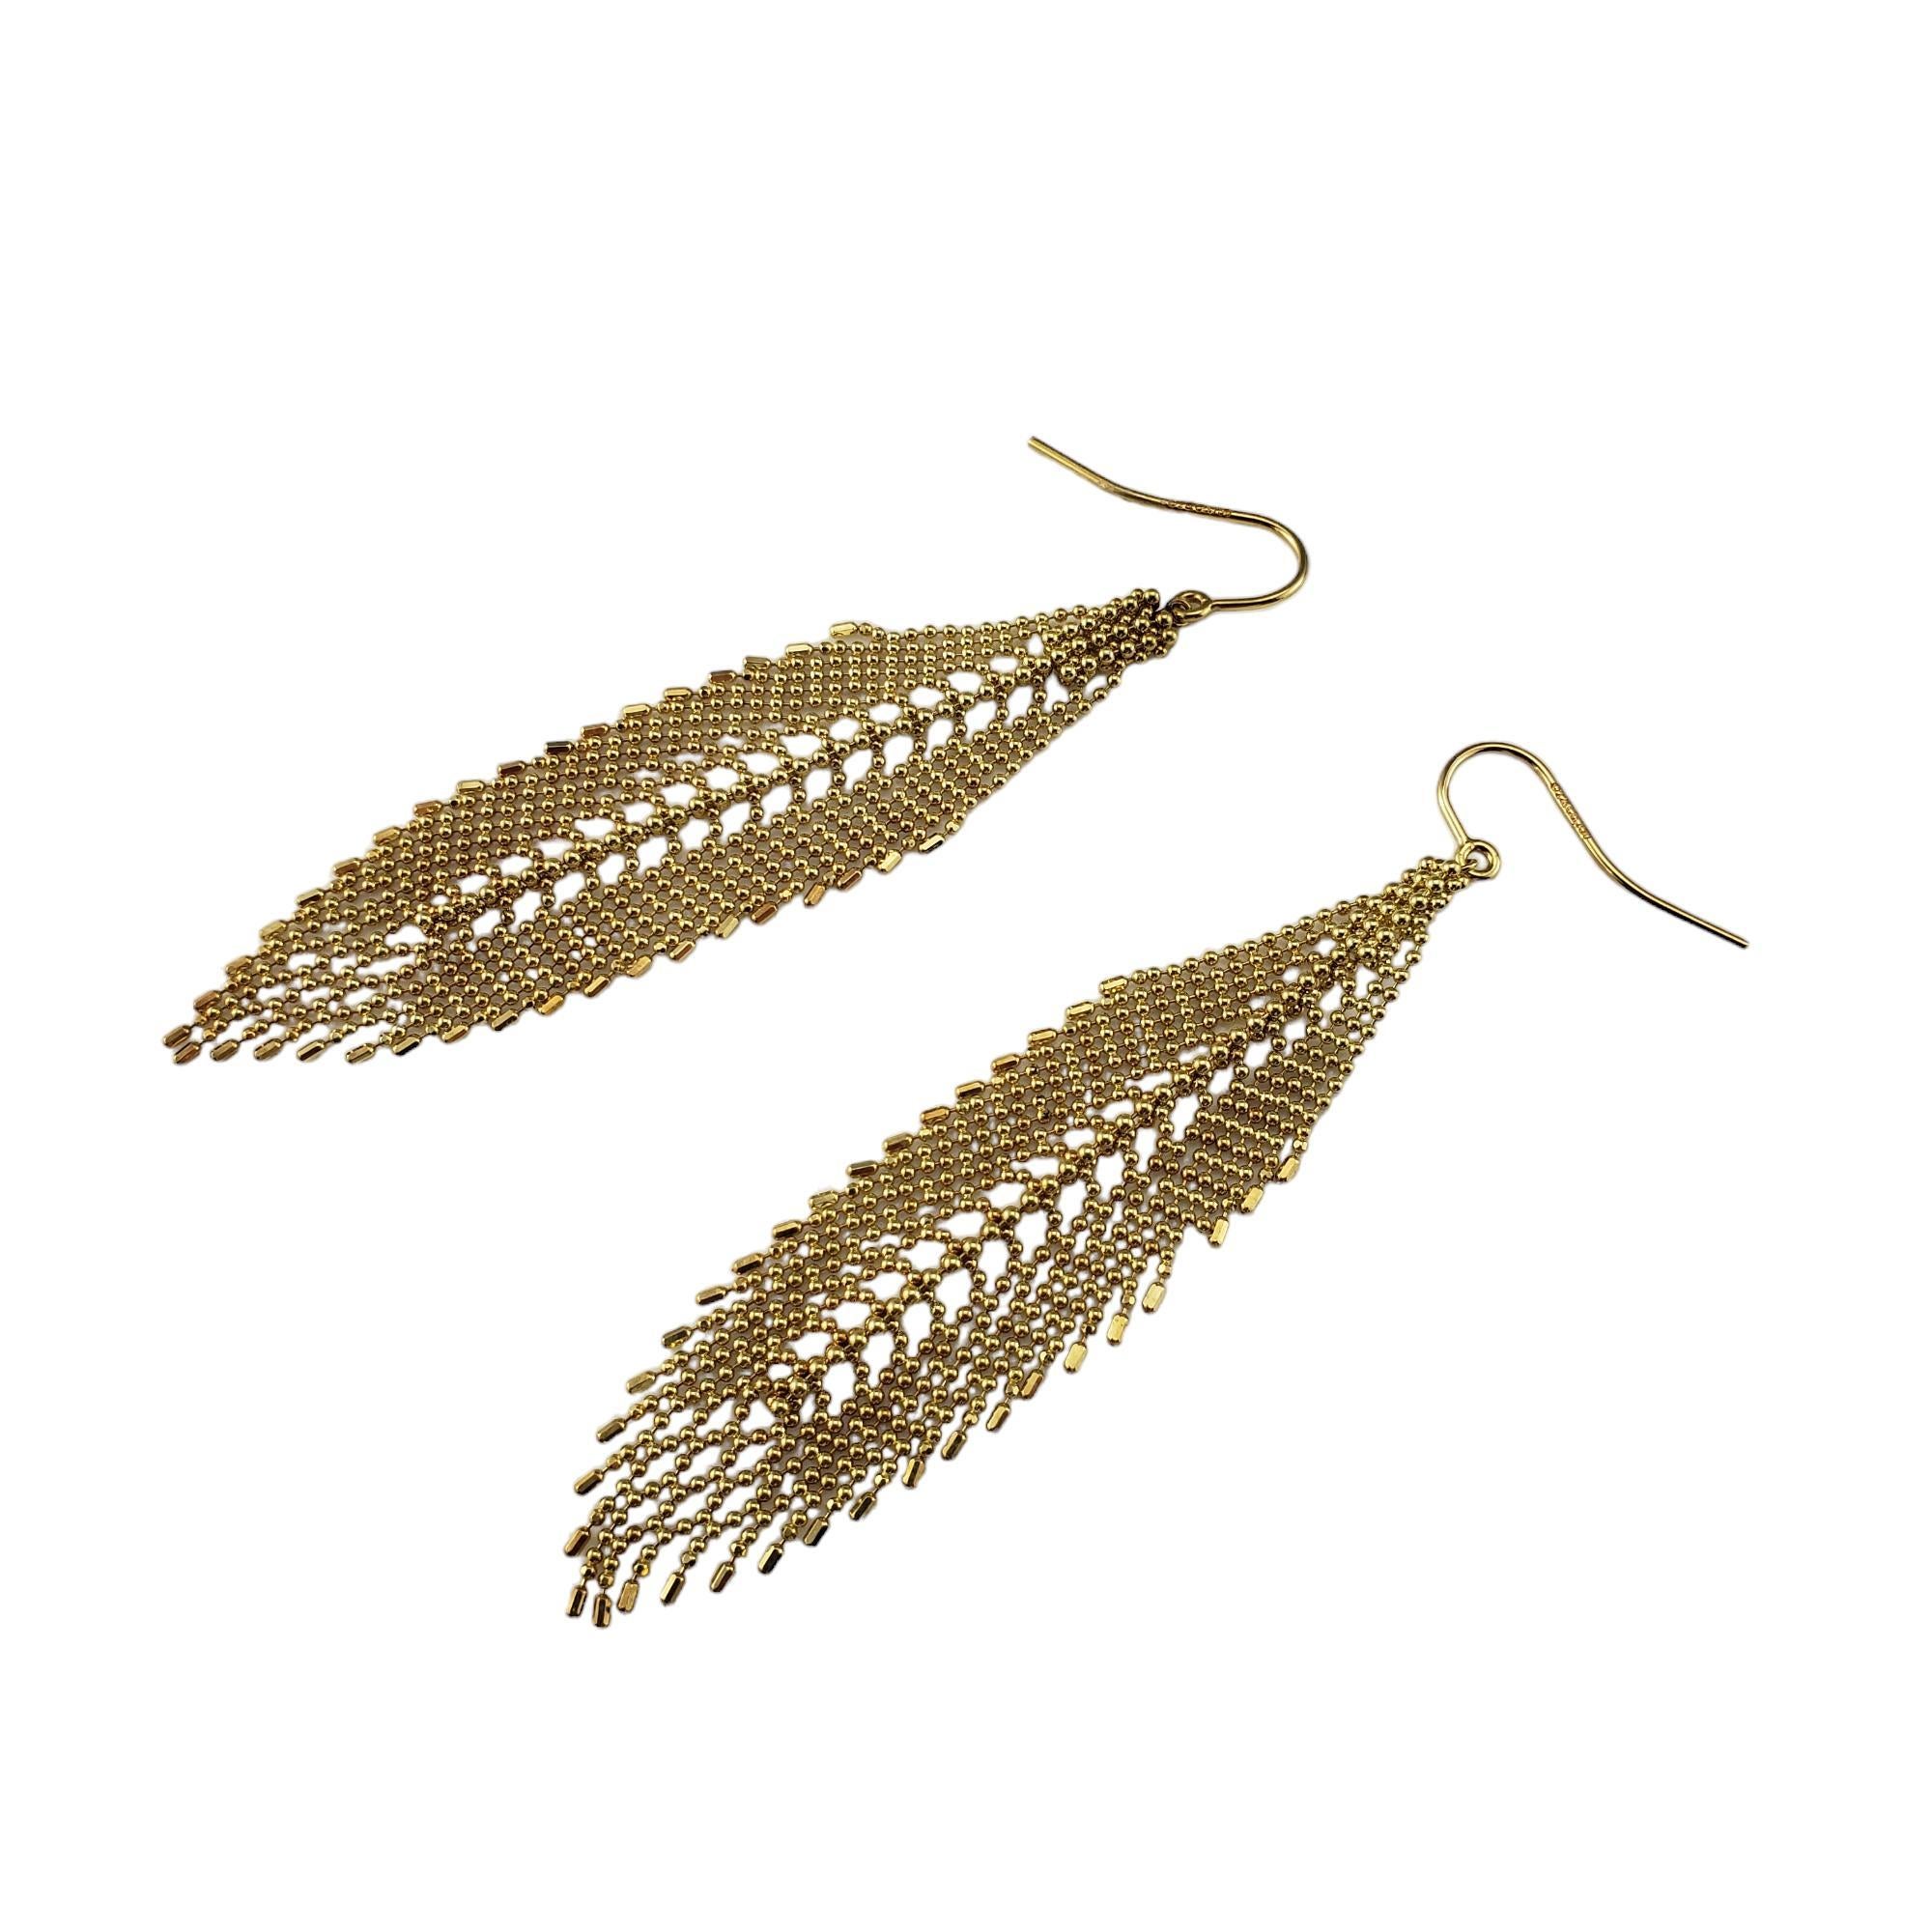 Vintage Tiffany & Co. 18K Yellow Gold Mesh Fringe Dangle Earrings-

These elegant dangle mesh earrings are crafted in beautifully detailed 18K yellow gold by Tiffany & Co.

Size: 3.1 inches

Hallmark: T&CO.  750

Weight: 5.7 dwt./8.8 gr.

Very good